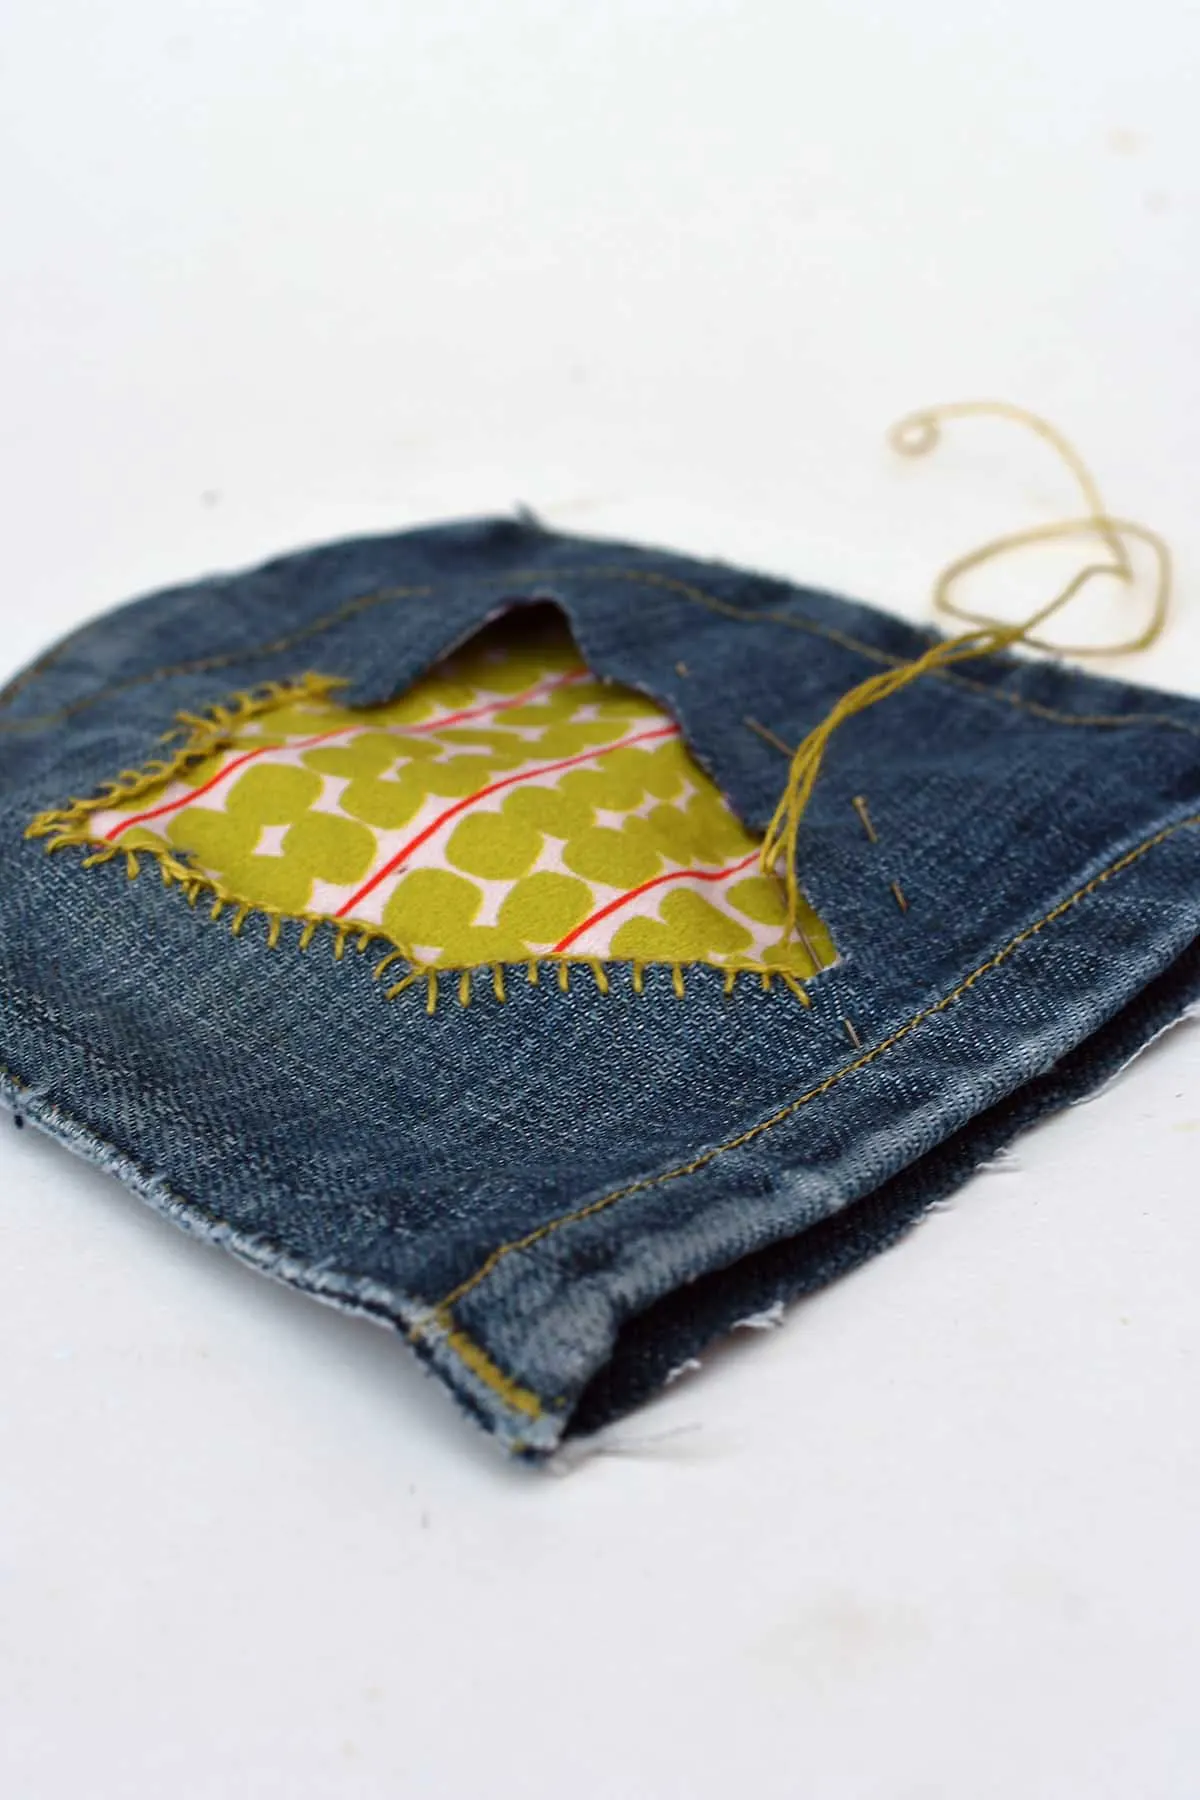 Blanket stitching the applique